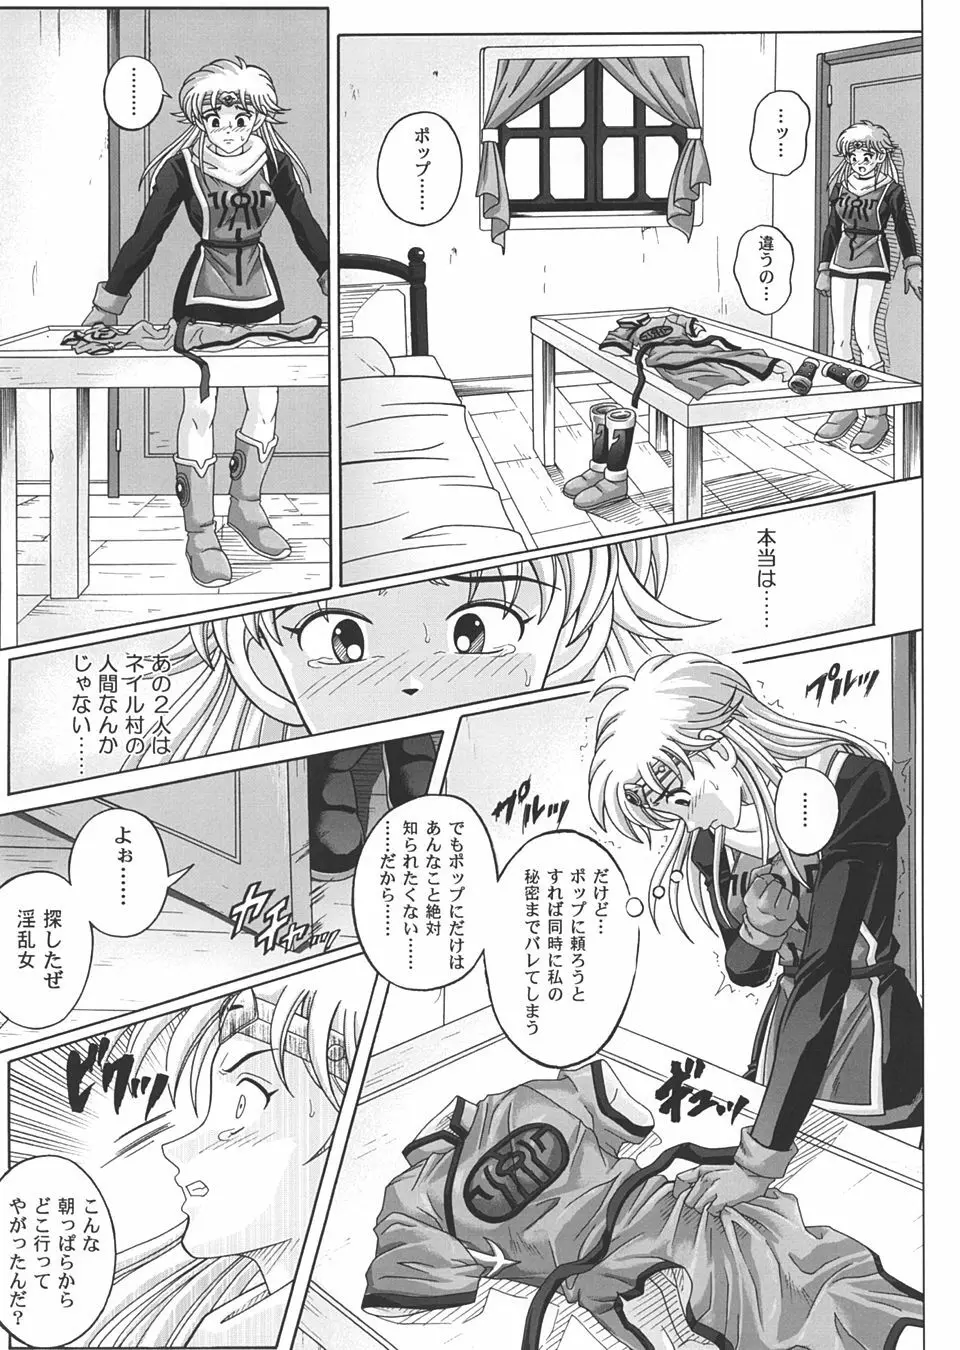 Sinclair 2 & Extra -シンクレア2- Page.10